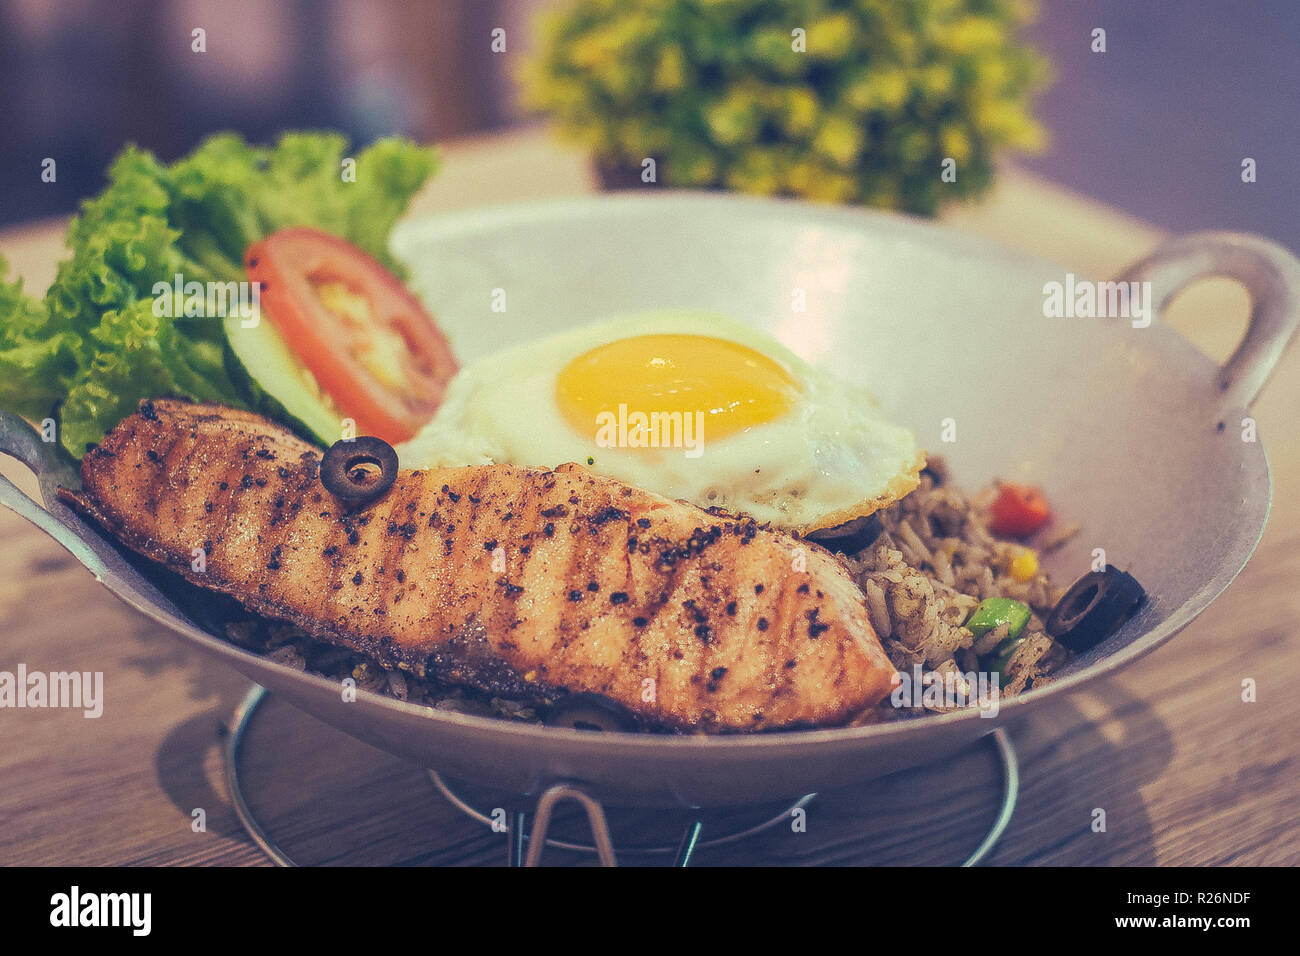 Black Olive Fried Rice with Grilled Salmon fried egg and mixed vegetable Stock Photo